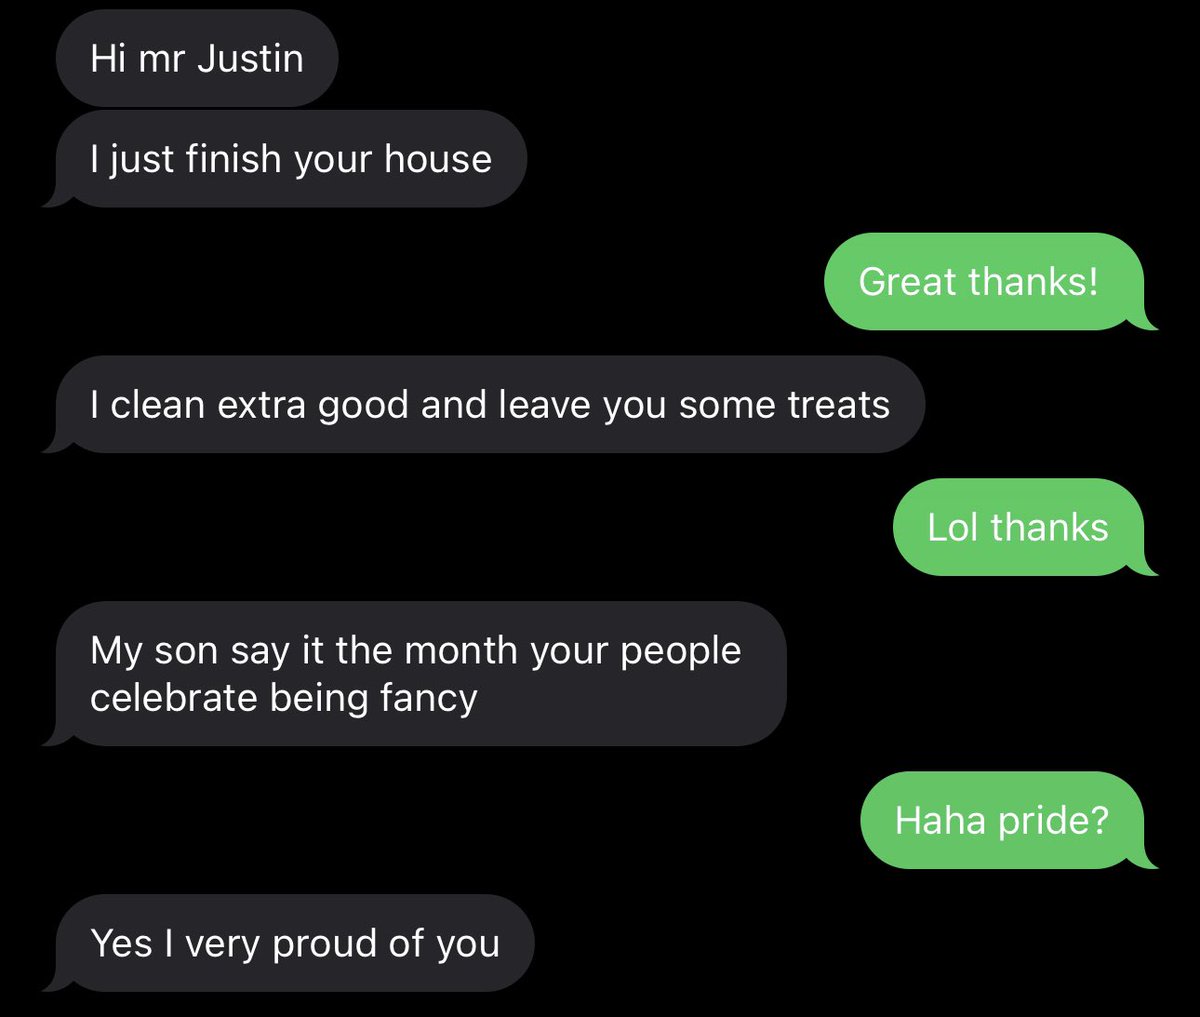 Happy Pride from my cleaning lady.